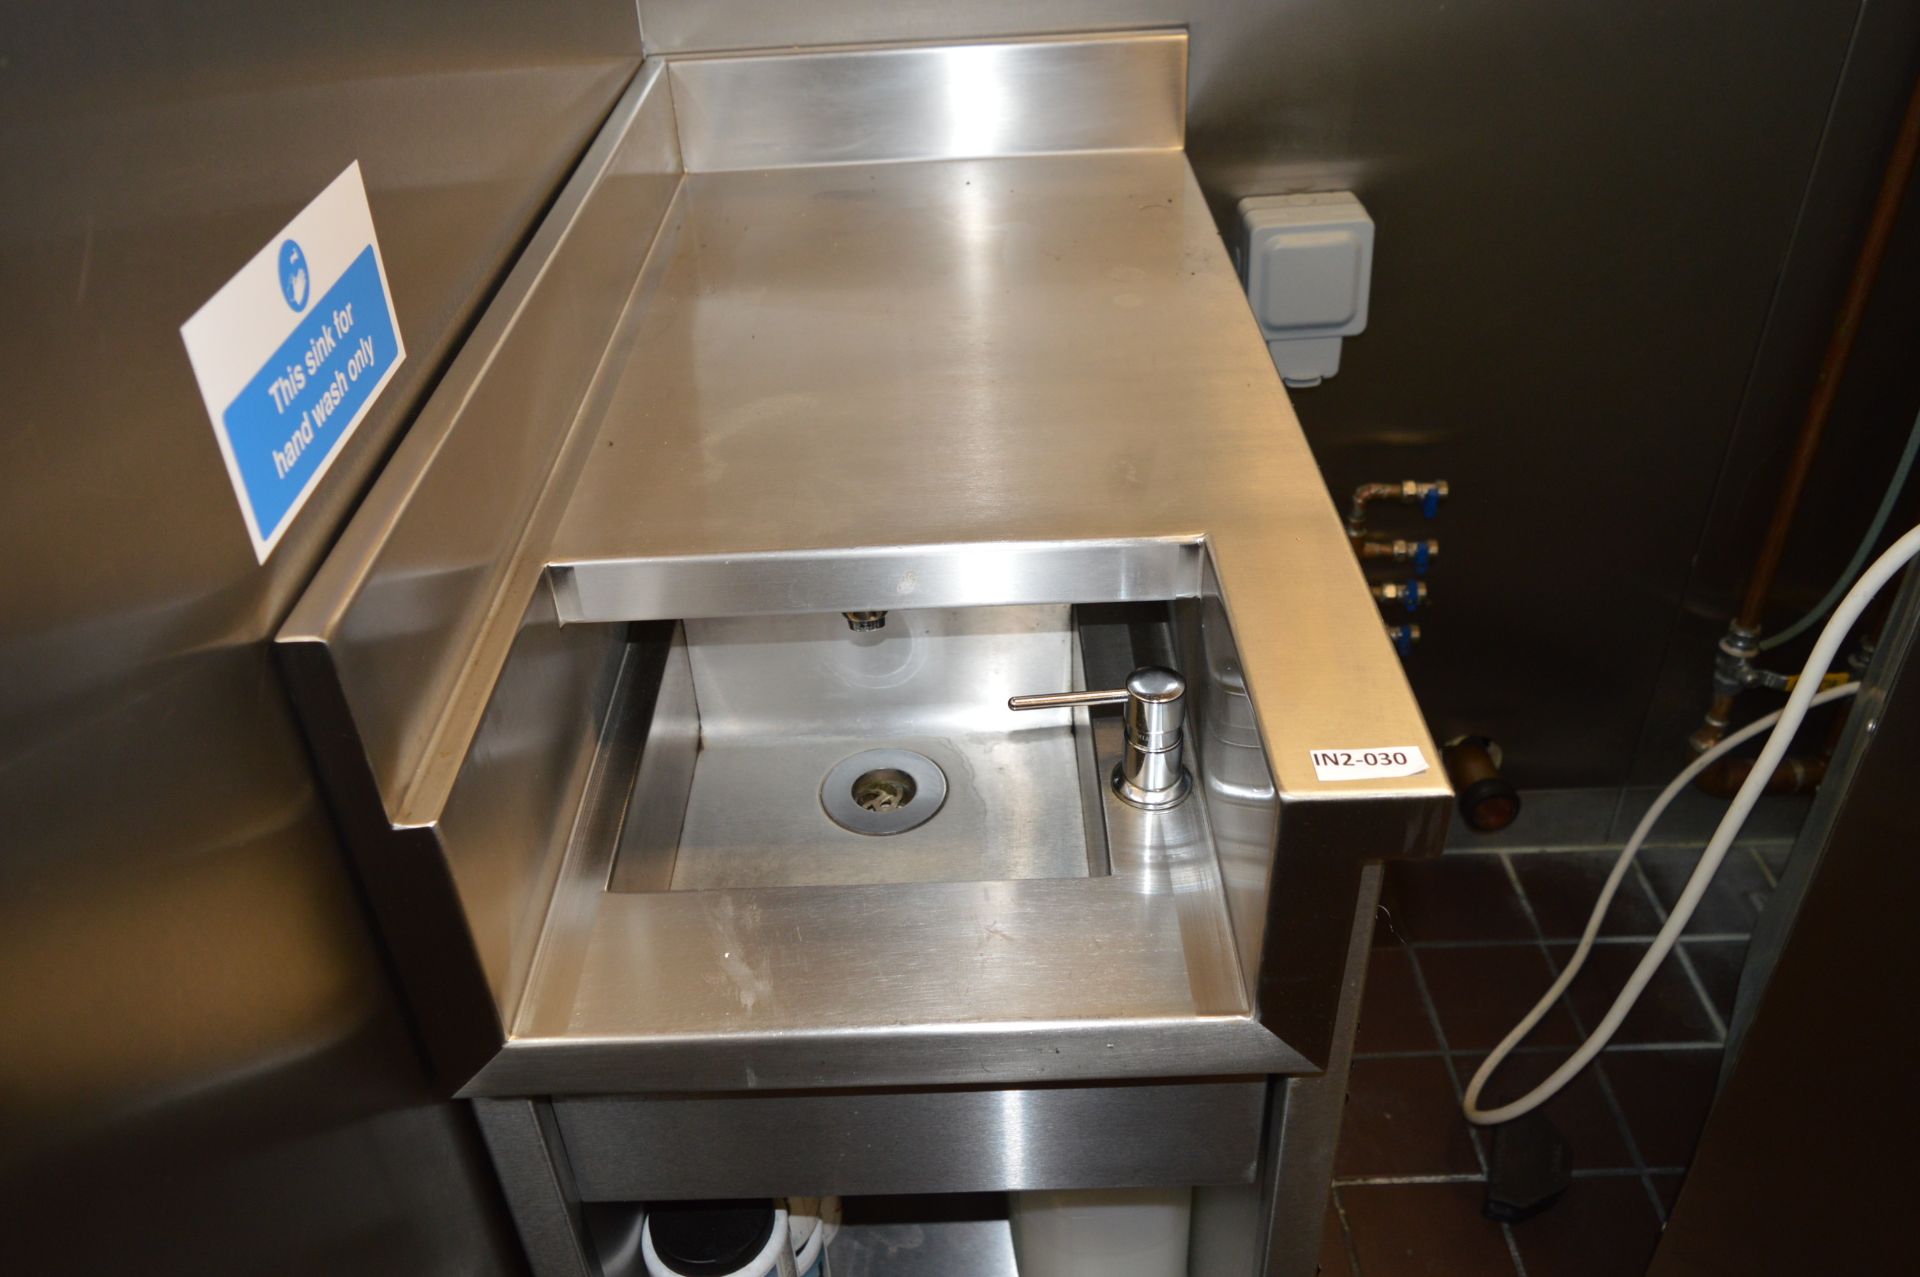 1 x Stainless Steel Hand Wash Prep Corner Unit - H91 x W48 x D90cms - CL350 - Ref 030 - Includes - Image 3 of 6